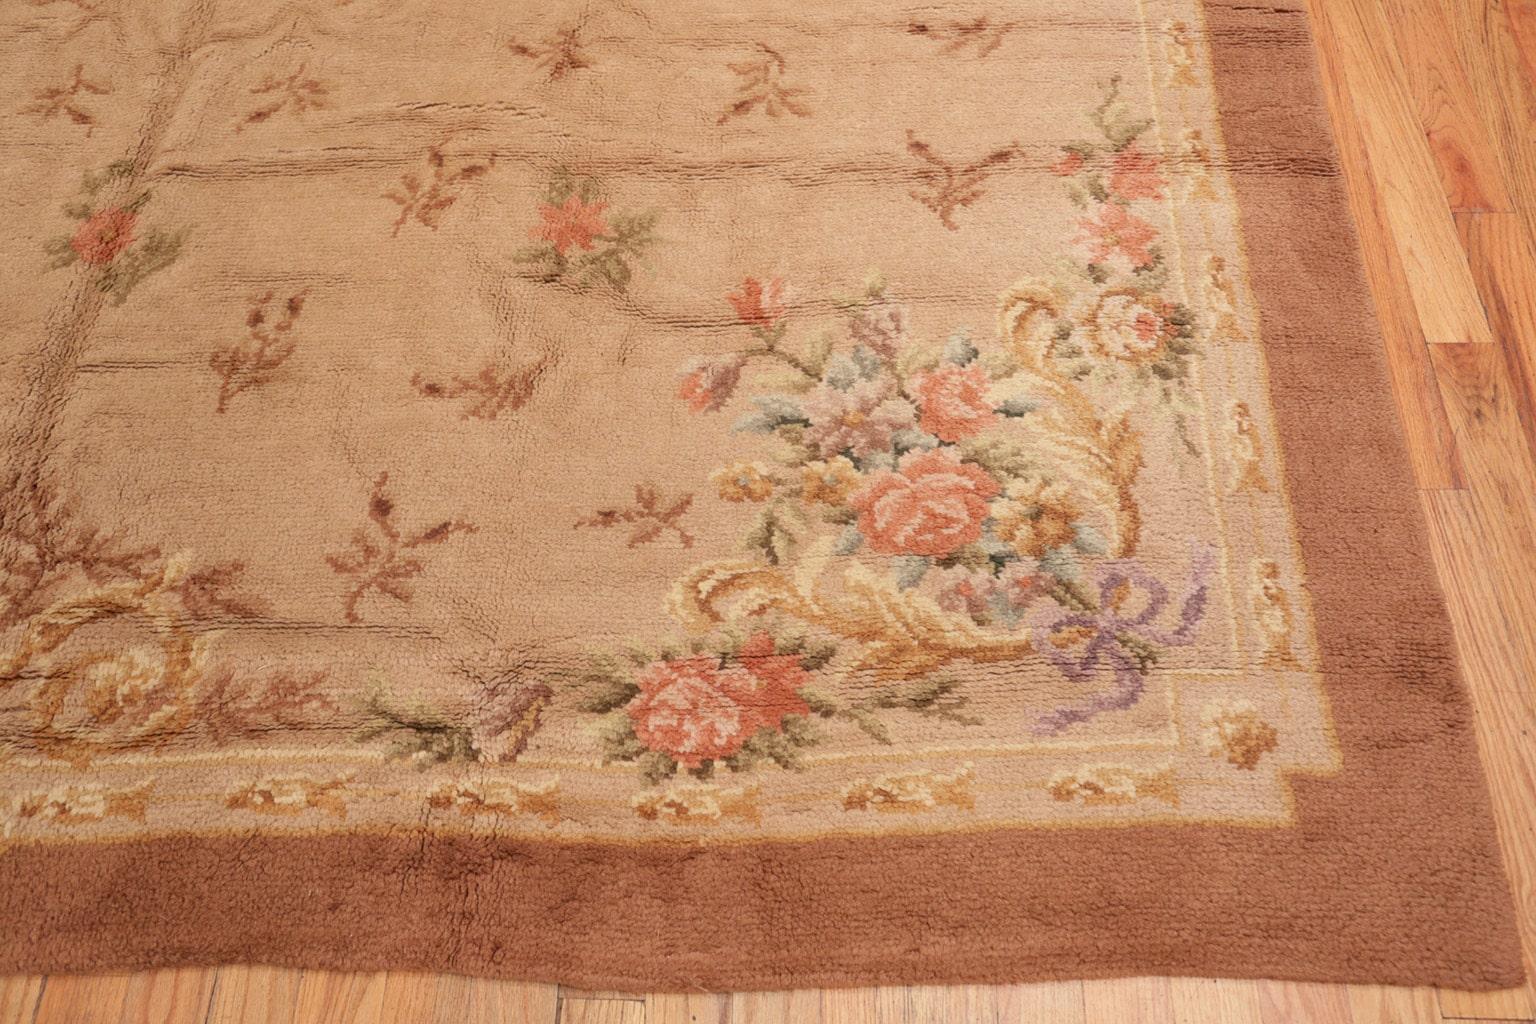 Spanish Colonial Large Antique Spanish Carpet. Size: 10 ft 7 in x 18 ft (3.23 m x 5.49 m)